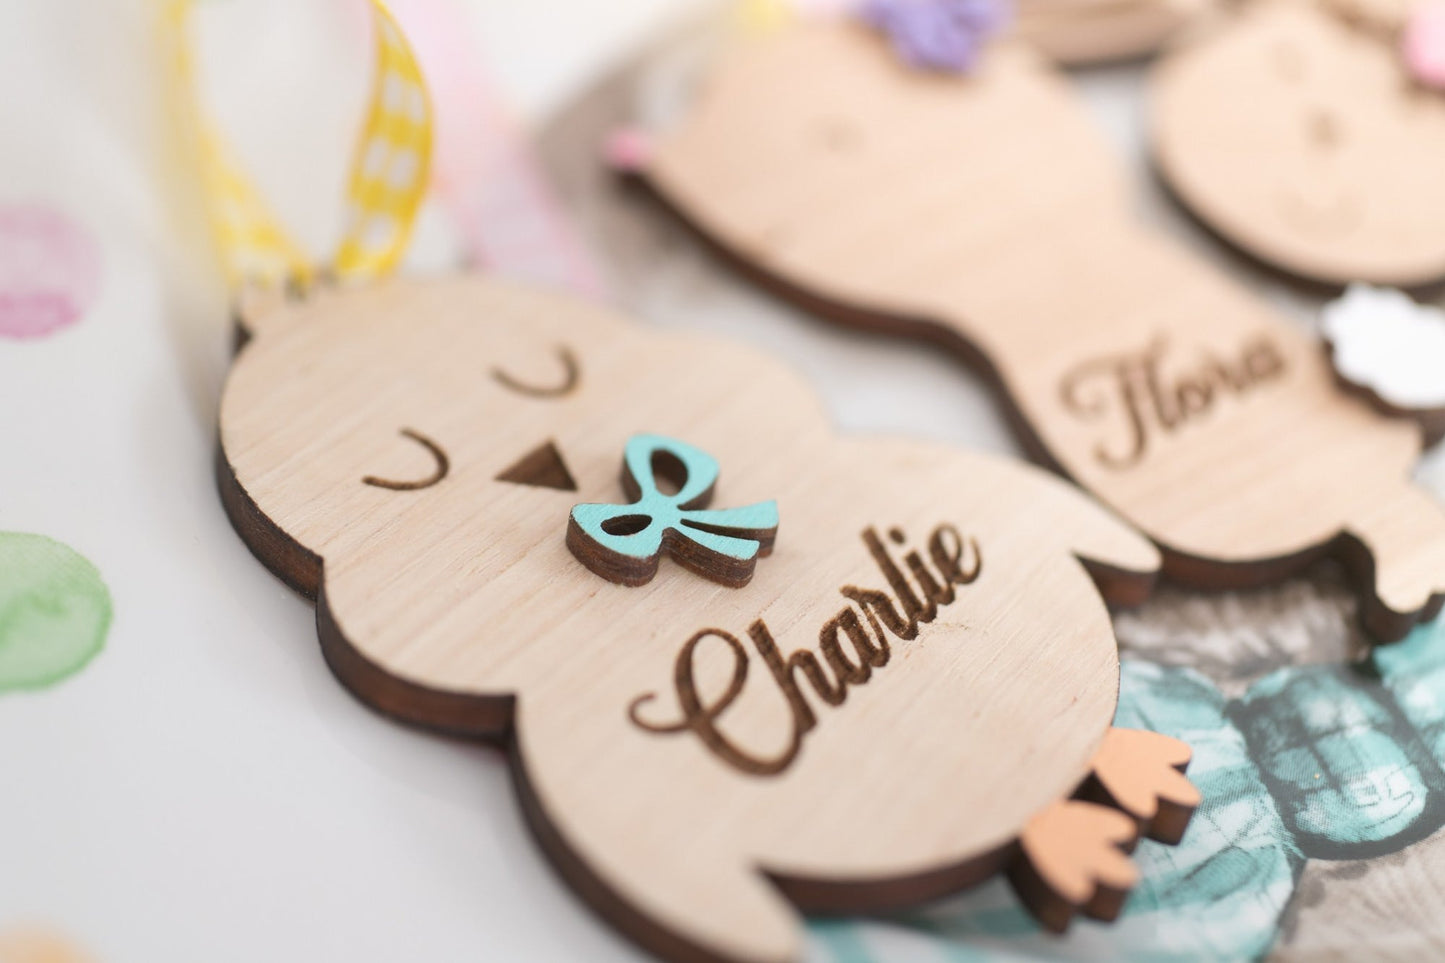 Chick - Farmhouse Style Personalized Easter Basket Tag